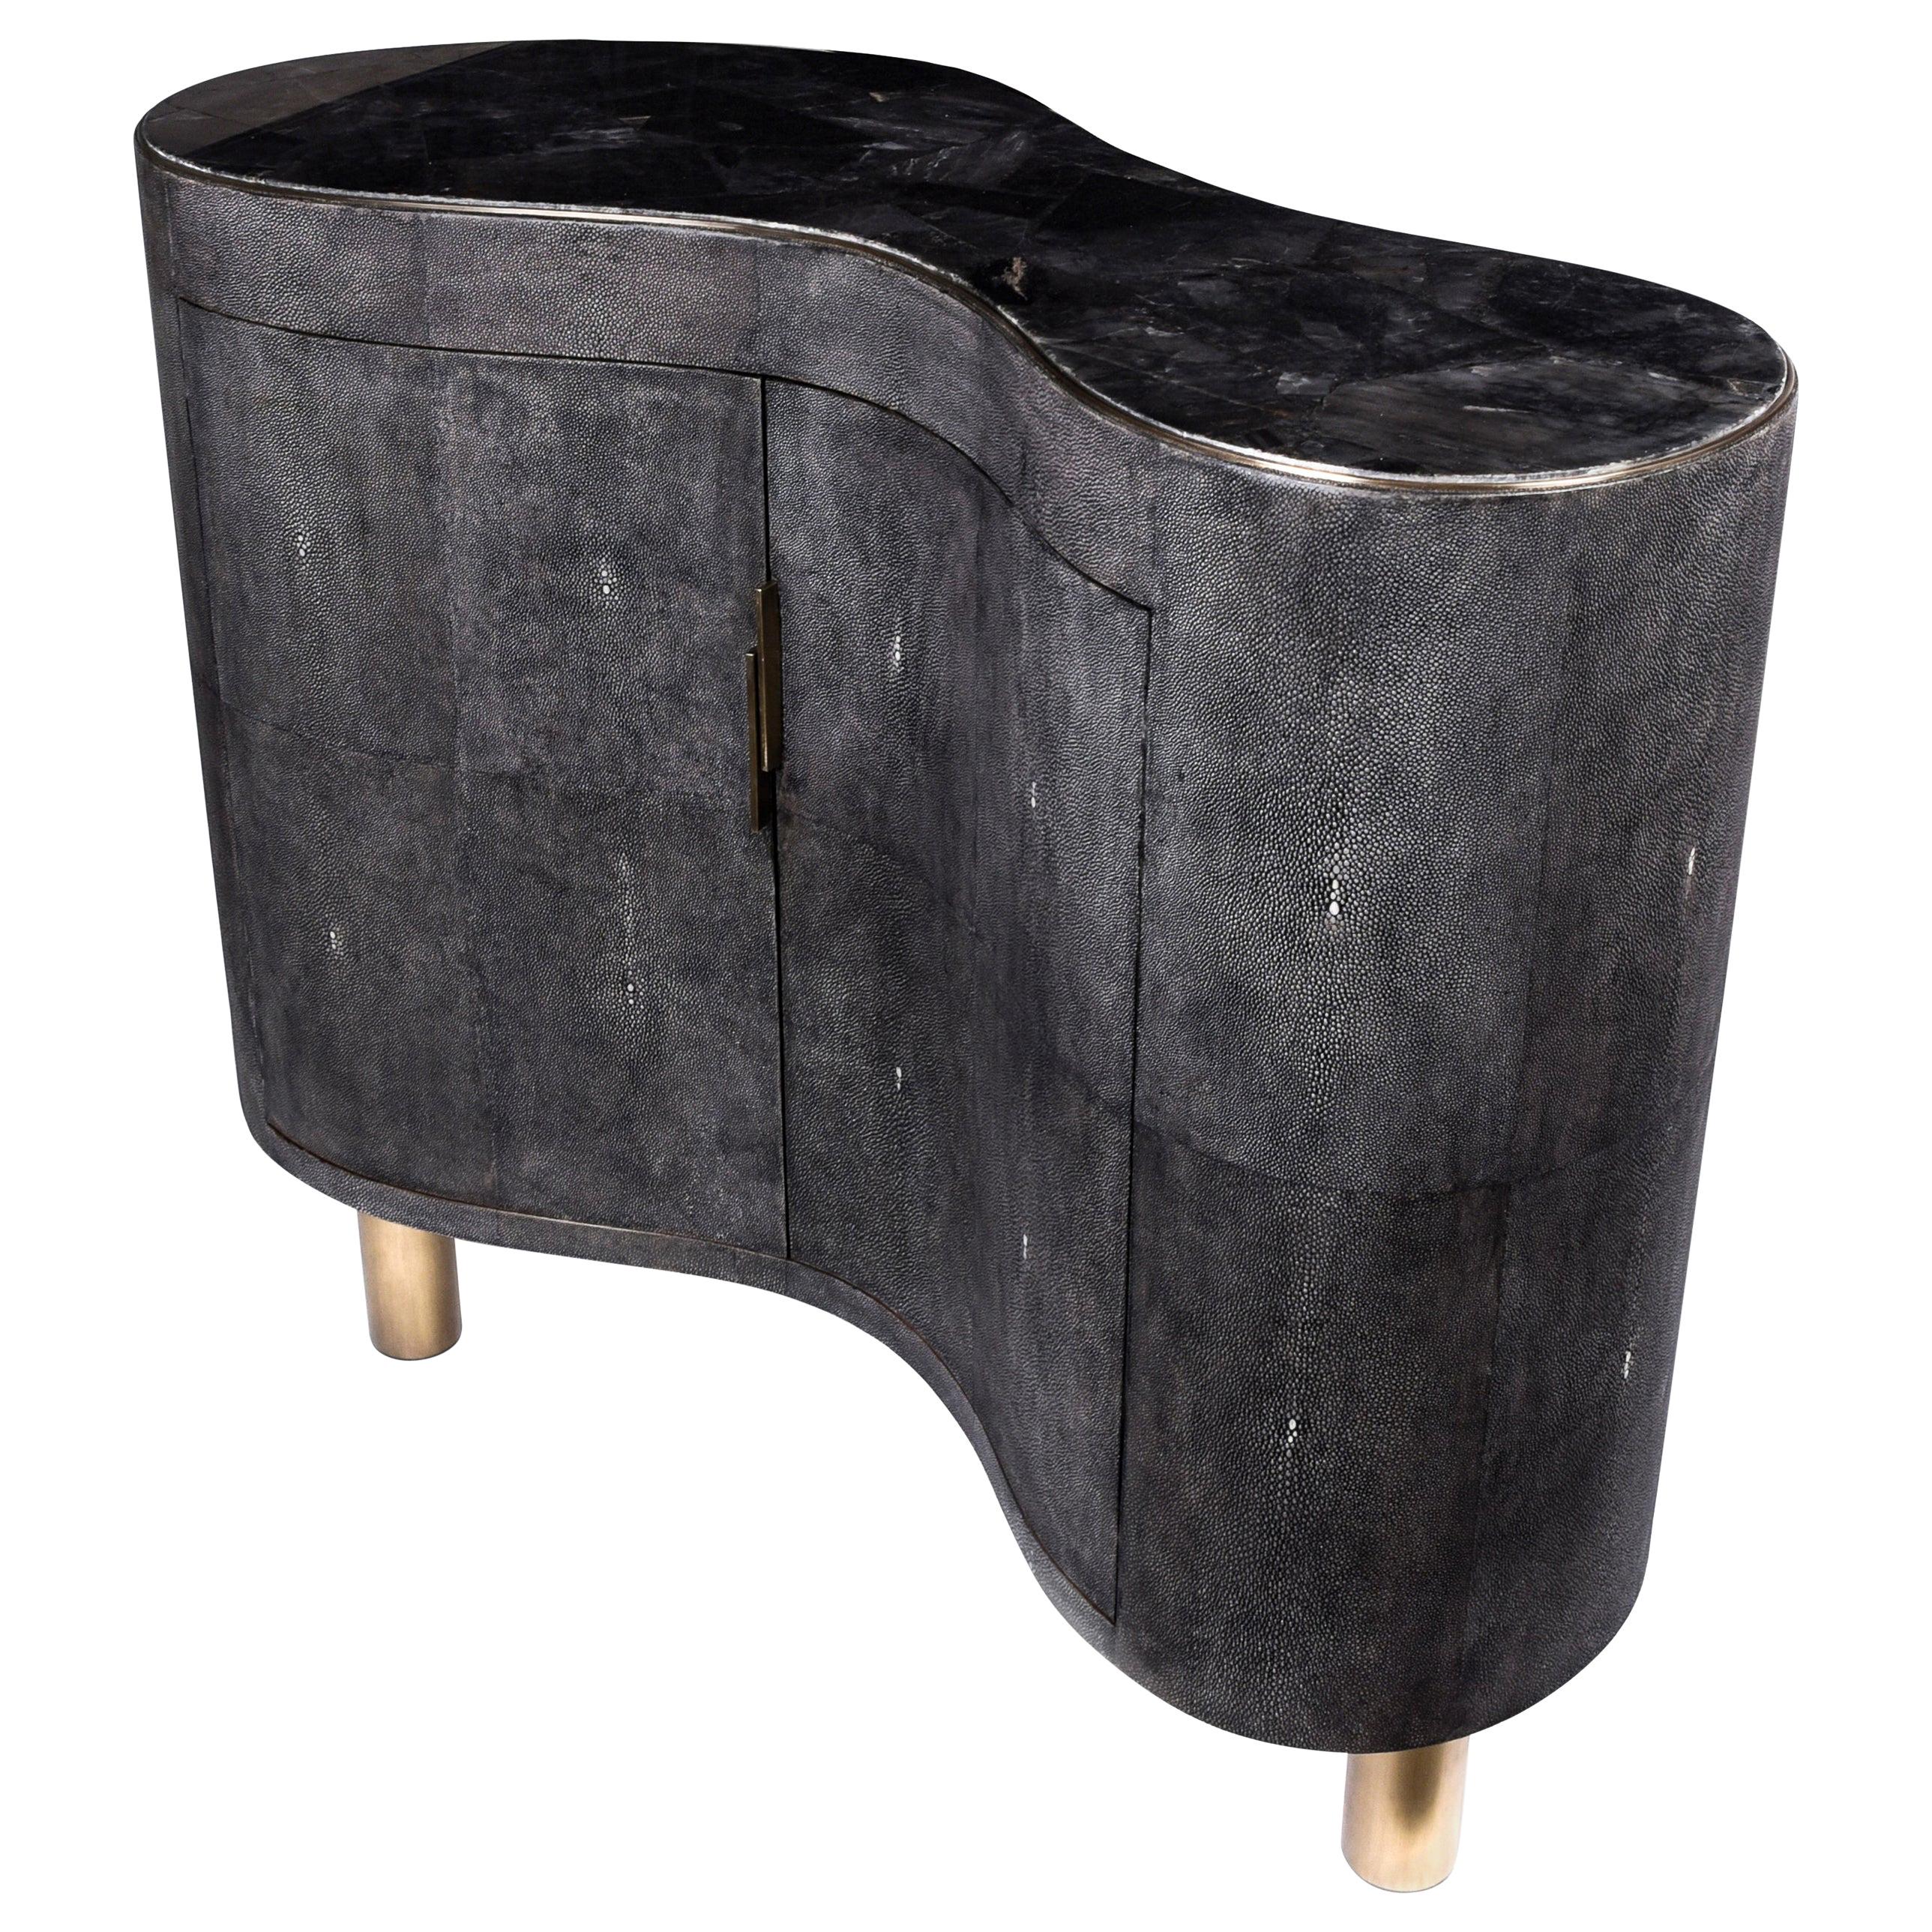 The constellation commode is the perfect storage unit for a living room or dining area. The amorphous shaped piece is completely inlaid in cream shagreen, with a stunning Smokey white quartz top. The piece sits on a pair of tubular bronze-patina